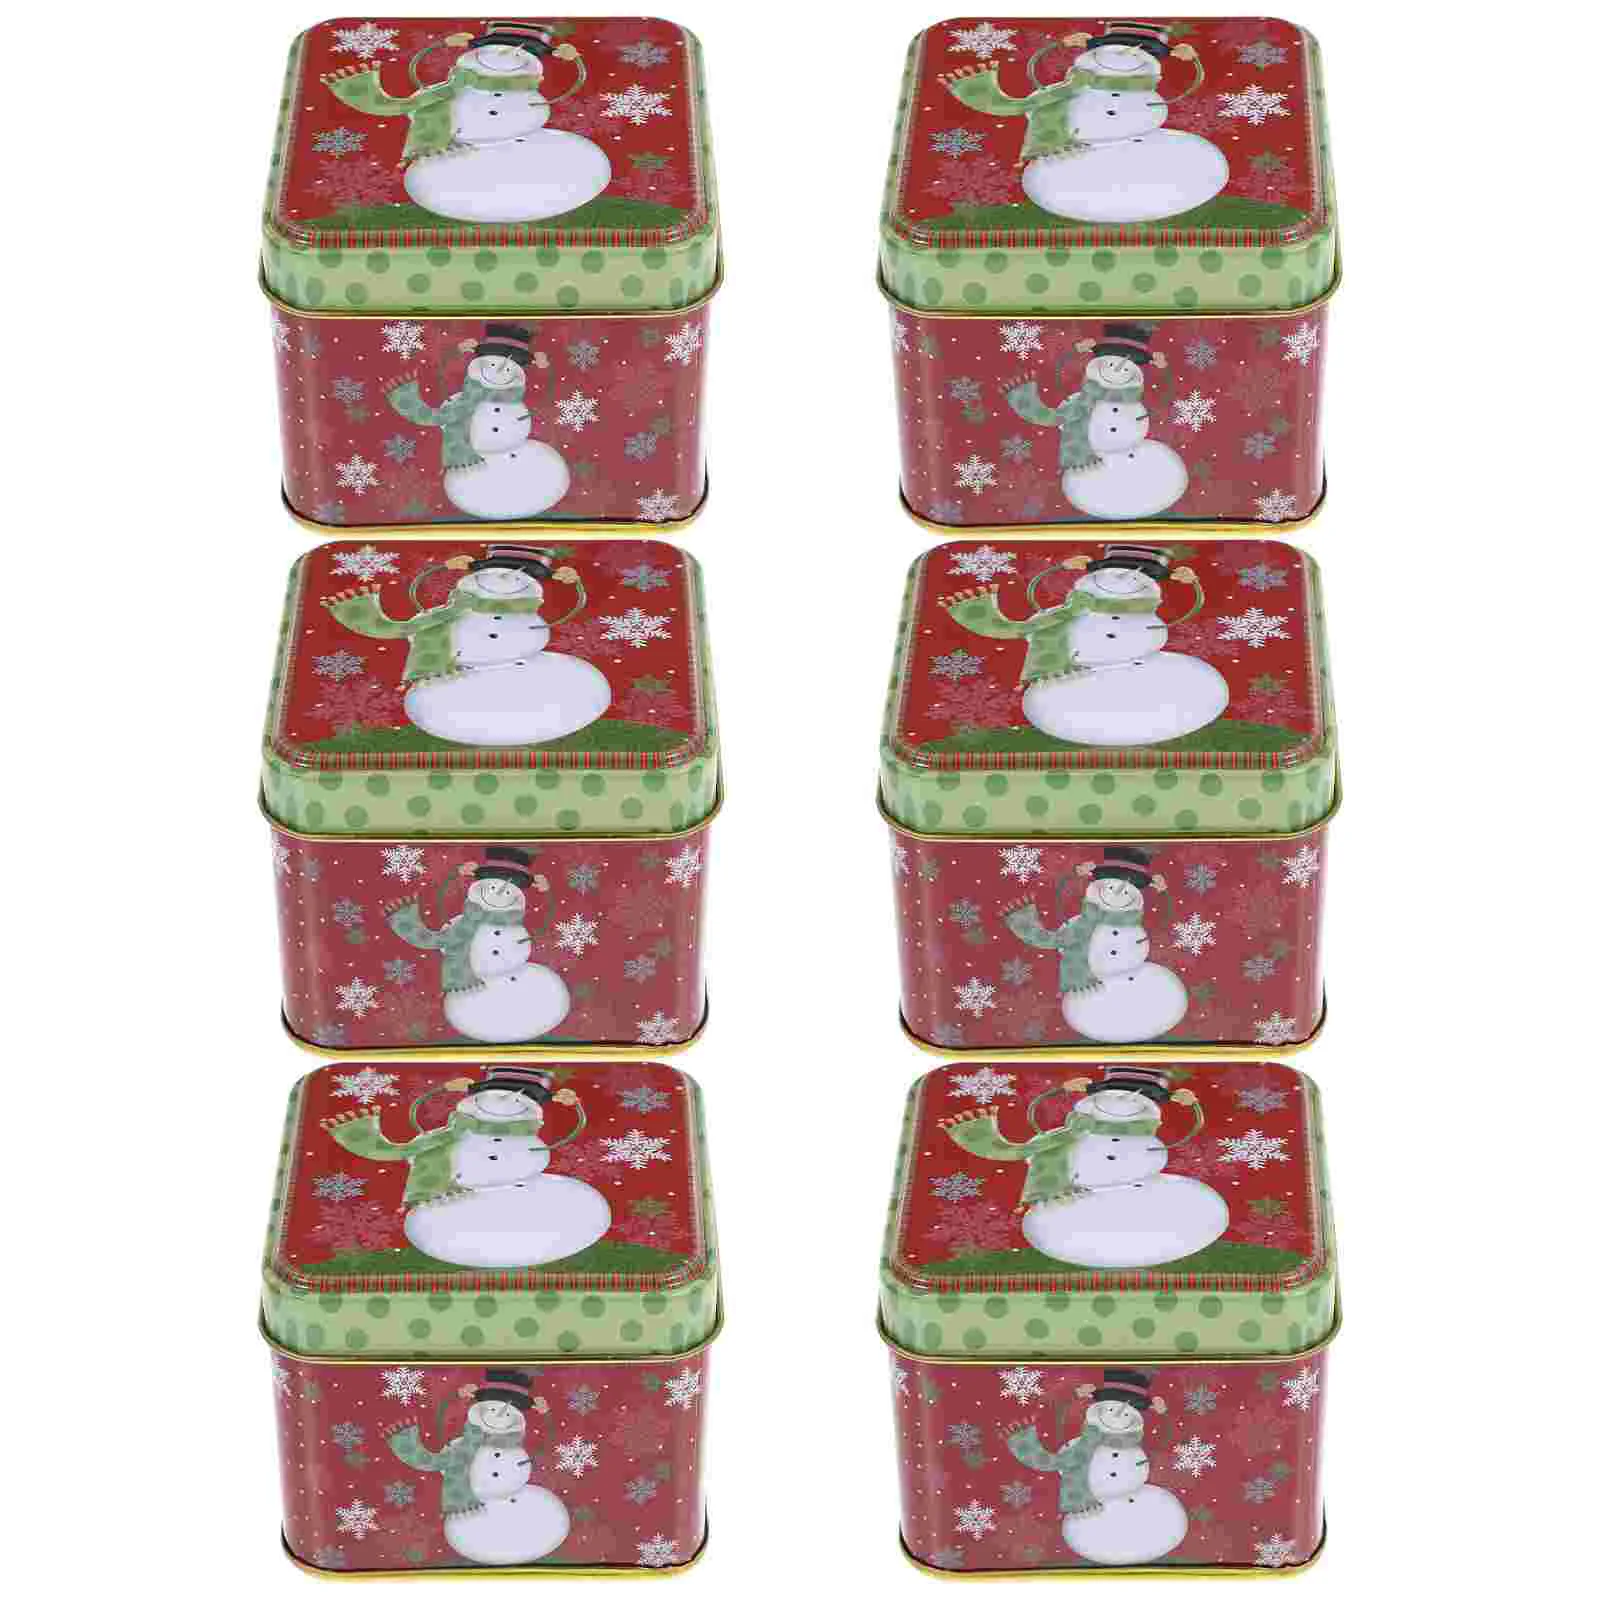 

6 Pcs Gift Box Candy Containers Cookie Tins Lids Christmas Supplies Sweet Sugar Case Tinplate Storage